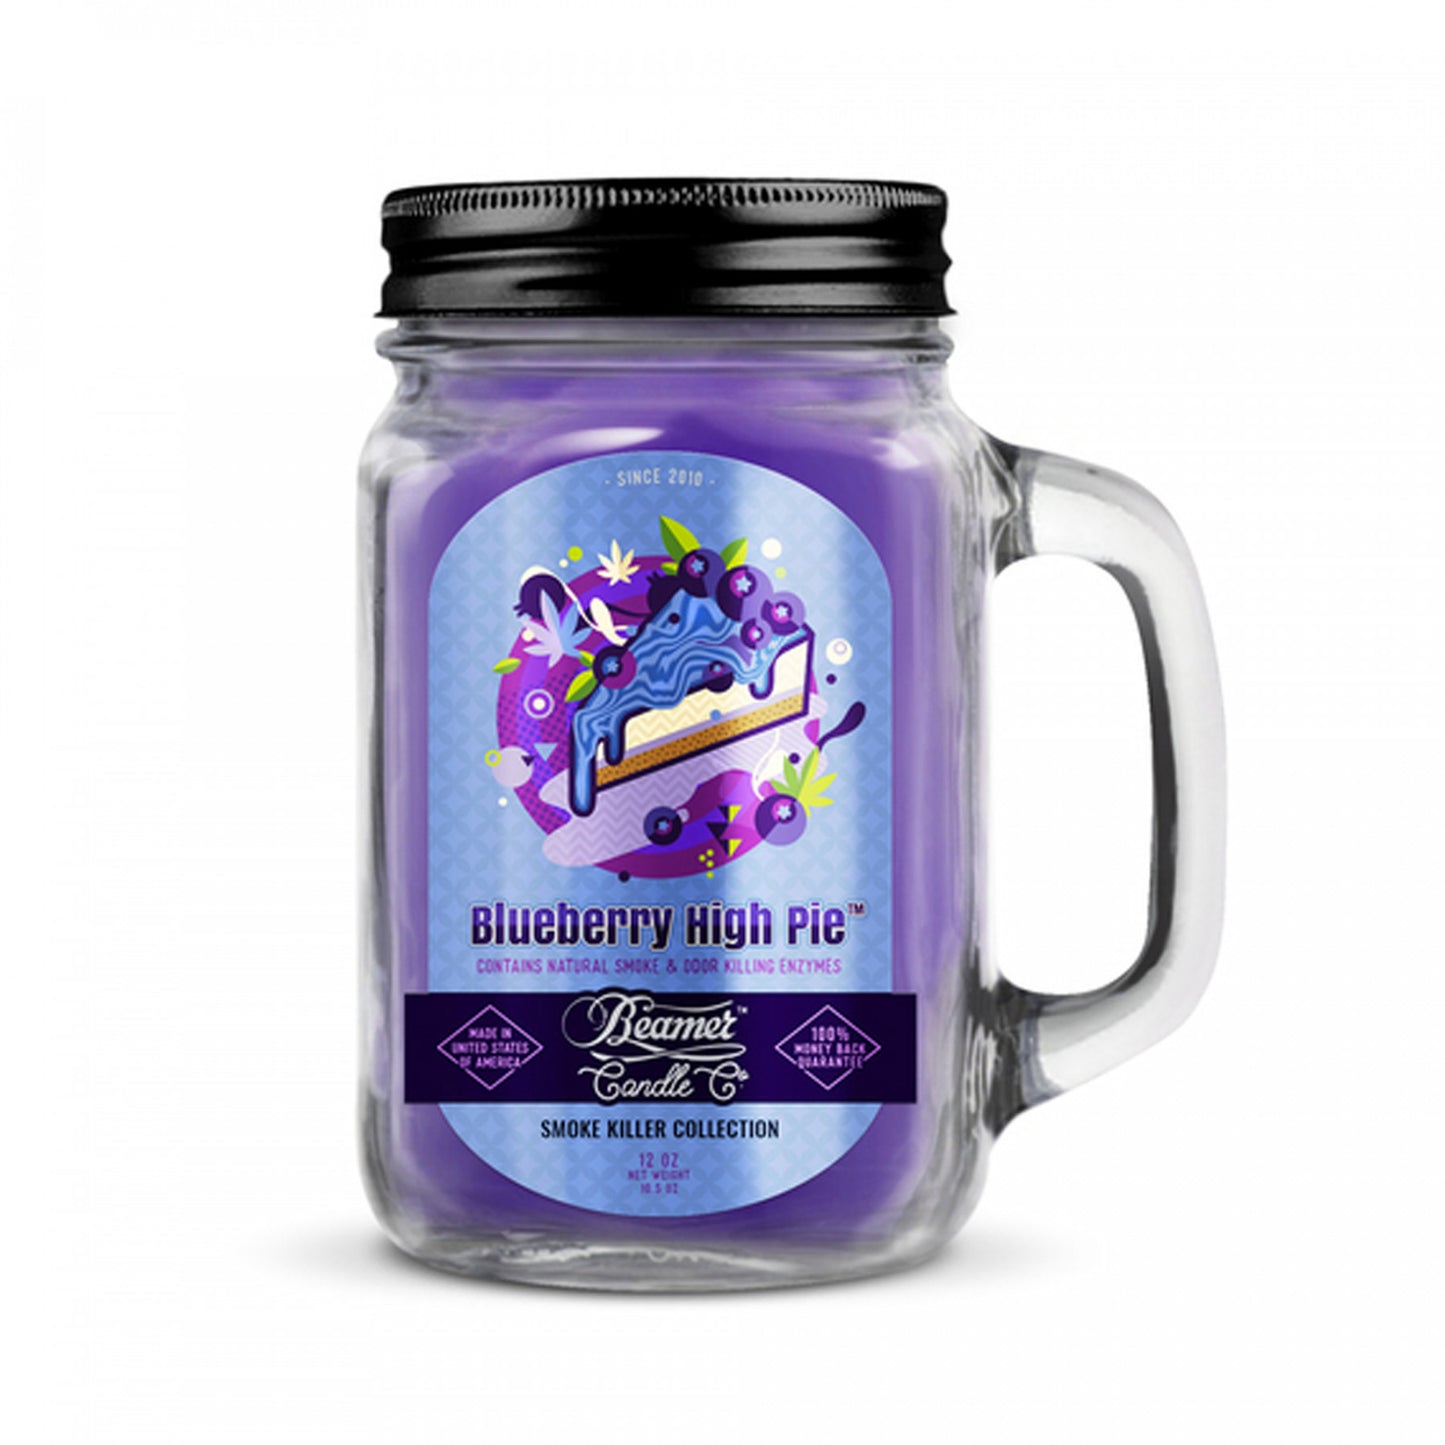 BEAMER™ CANDLE CO. 12oz Blueberry High Pie Candle